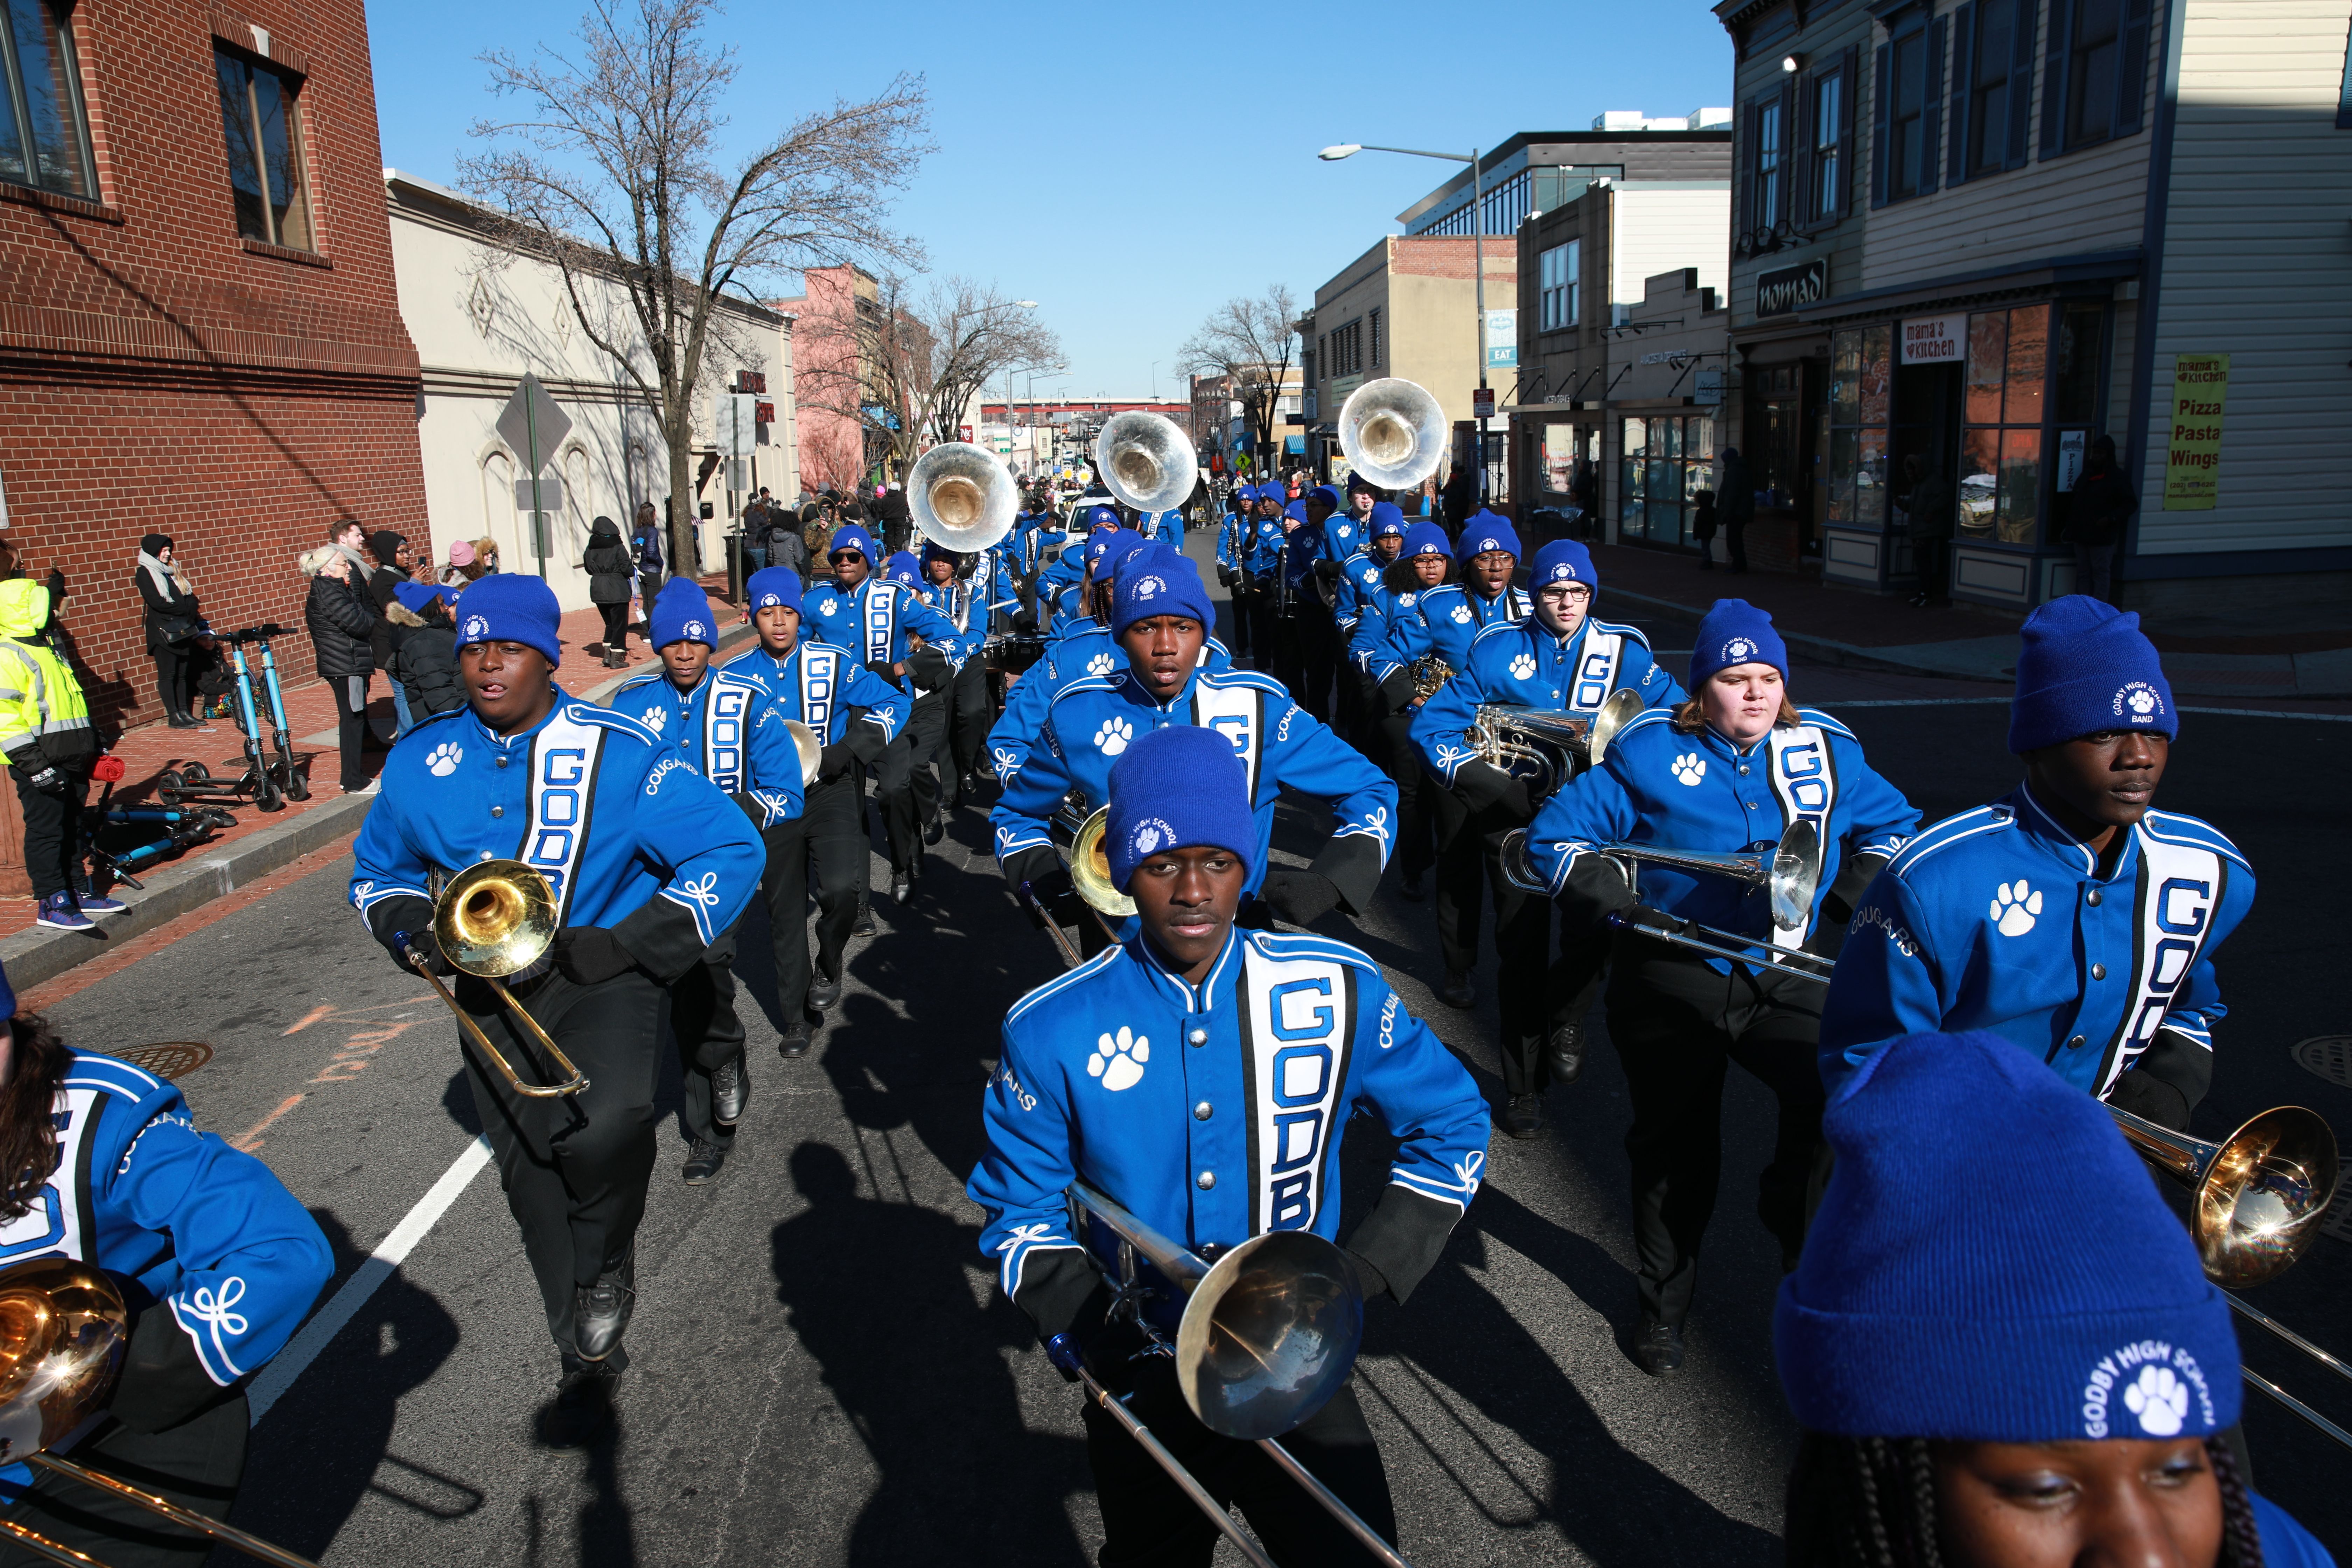 Marching band performs during the Martin Luther King Jr. Day parade on January 20, 2020 in Washington, DC, United States on January 20